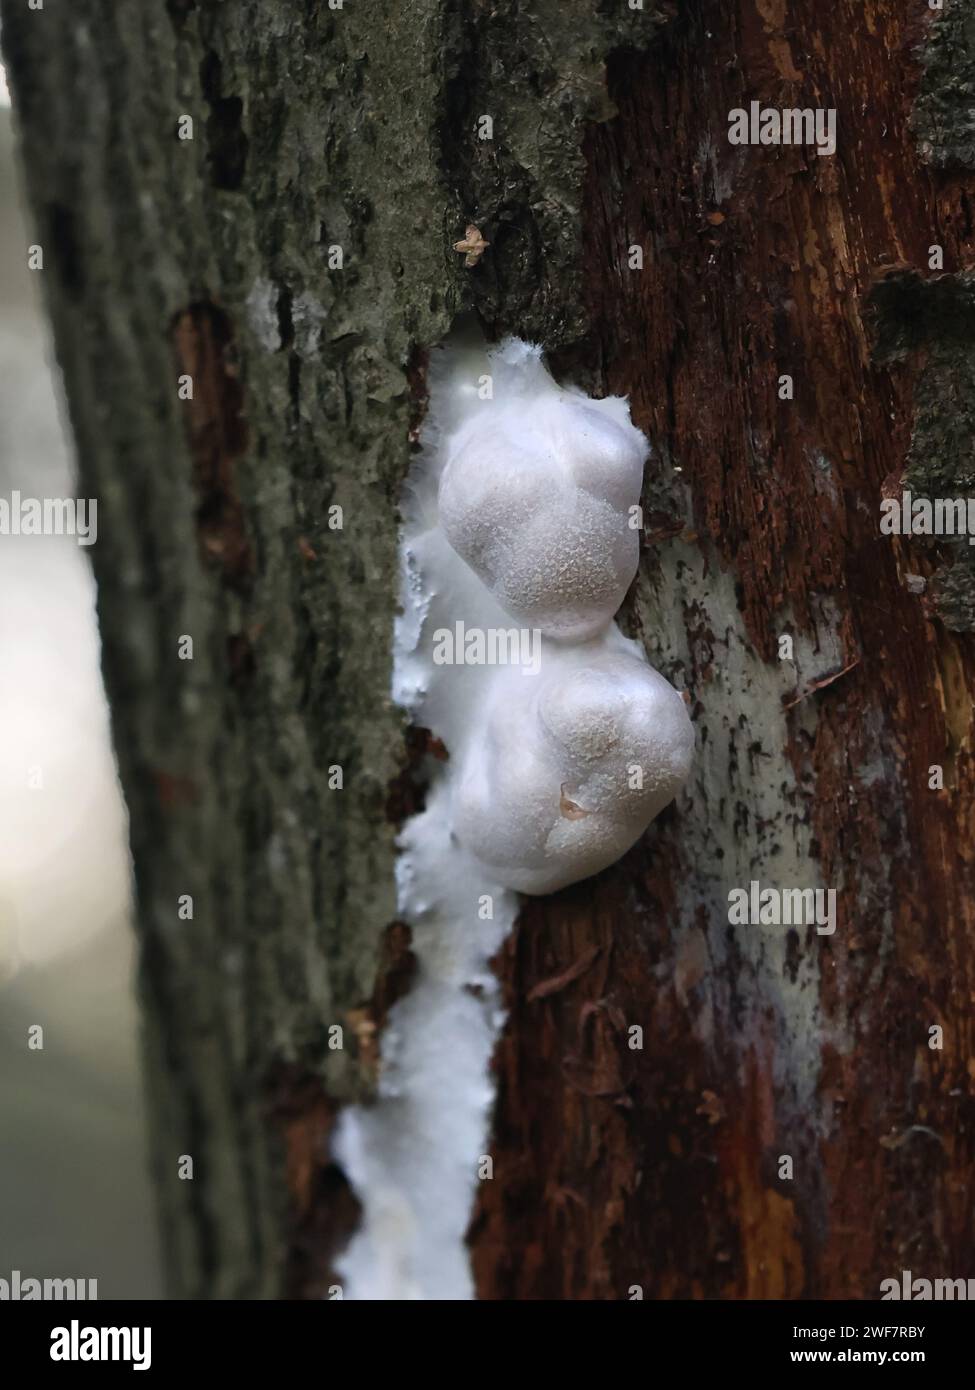 Reticularia lycoperdon, also called Enteridium lycoperdon, commonly known as the false puffball, slime mold from Finland Stock Photo